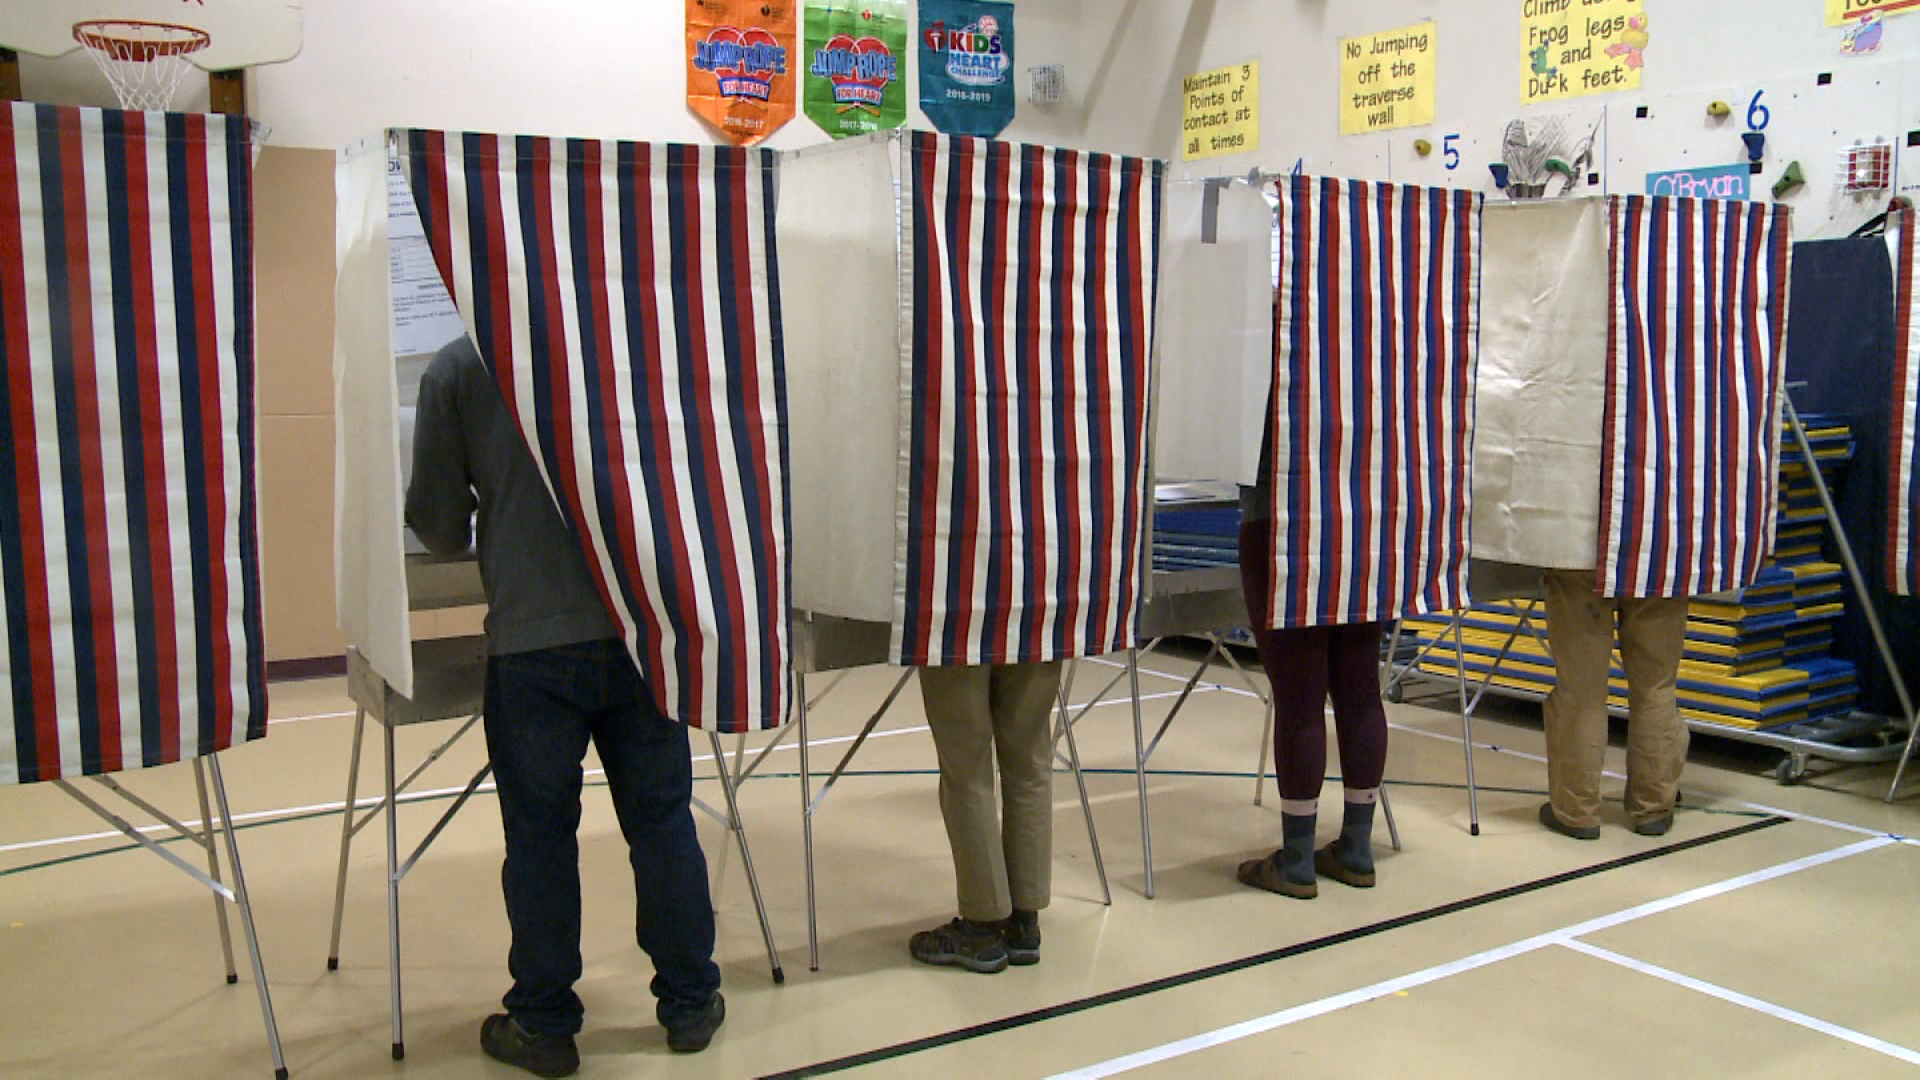 Alaskans cast their votes in Anchorage on Tuesday.